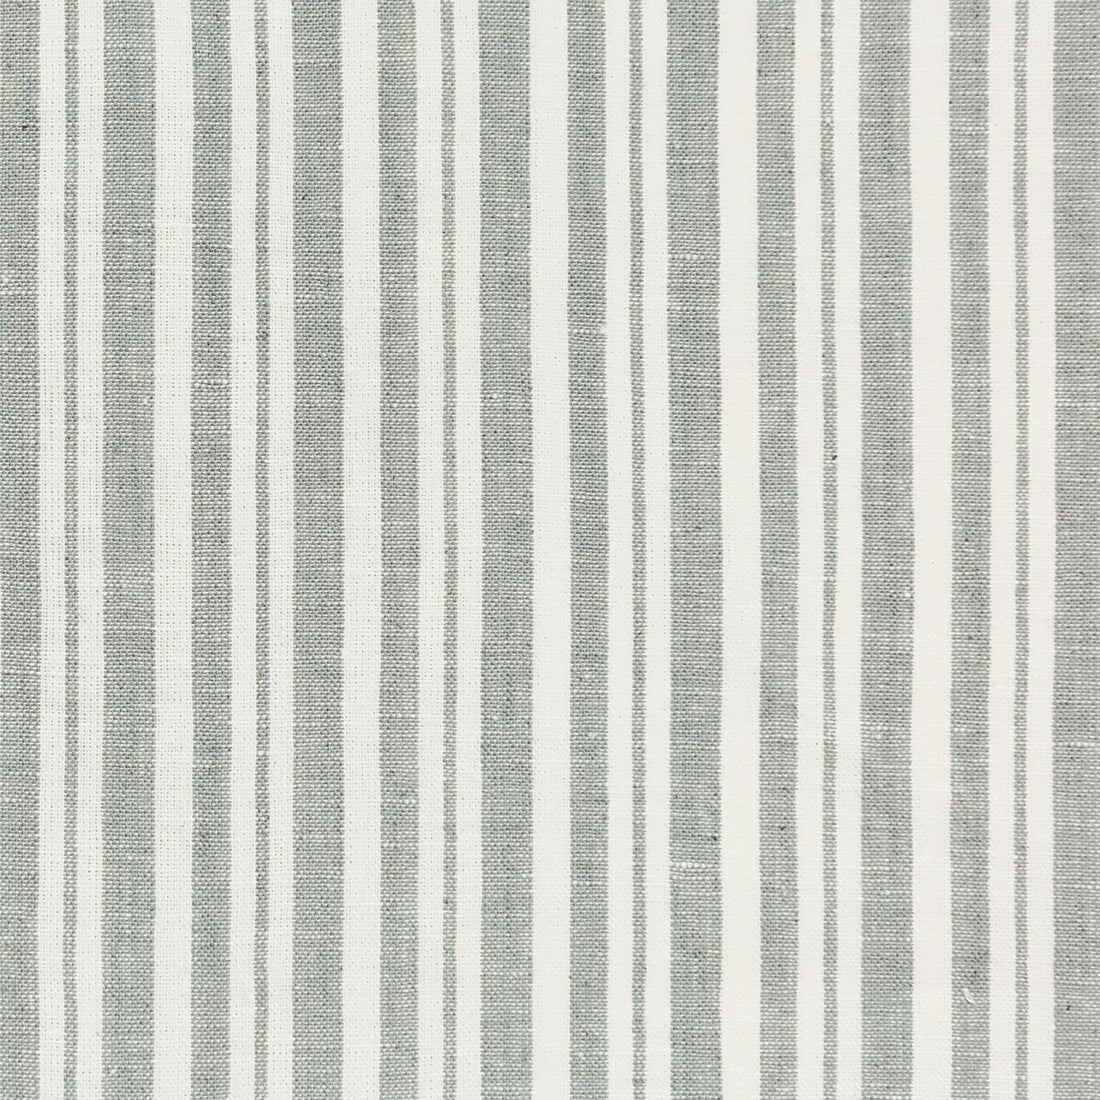 Jaffna fabric in grey color - pattern 35765.11.0 - by Kravet Basics in the Ceylon collection